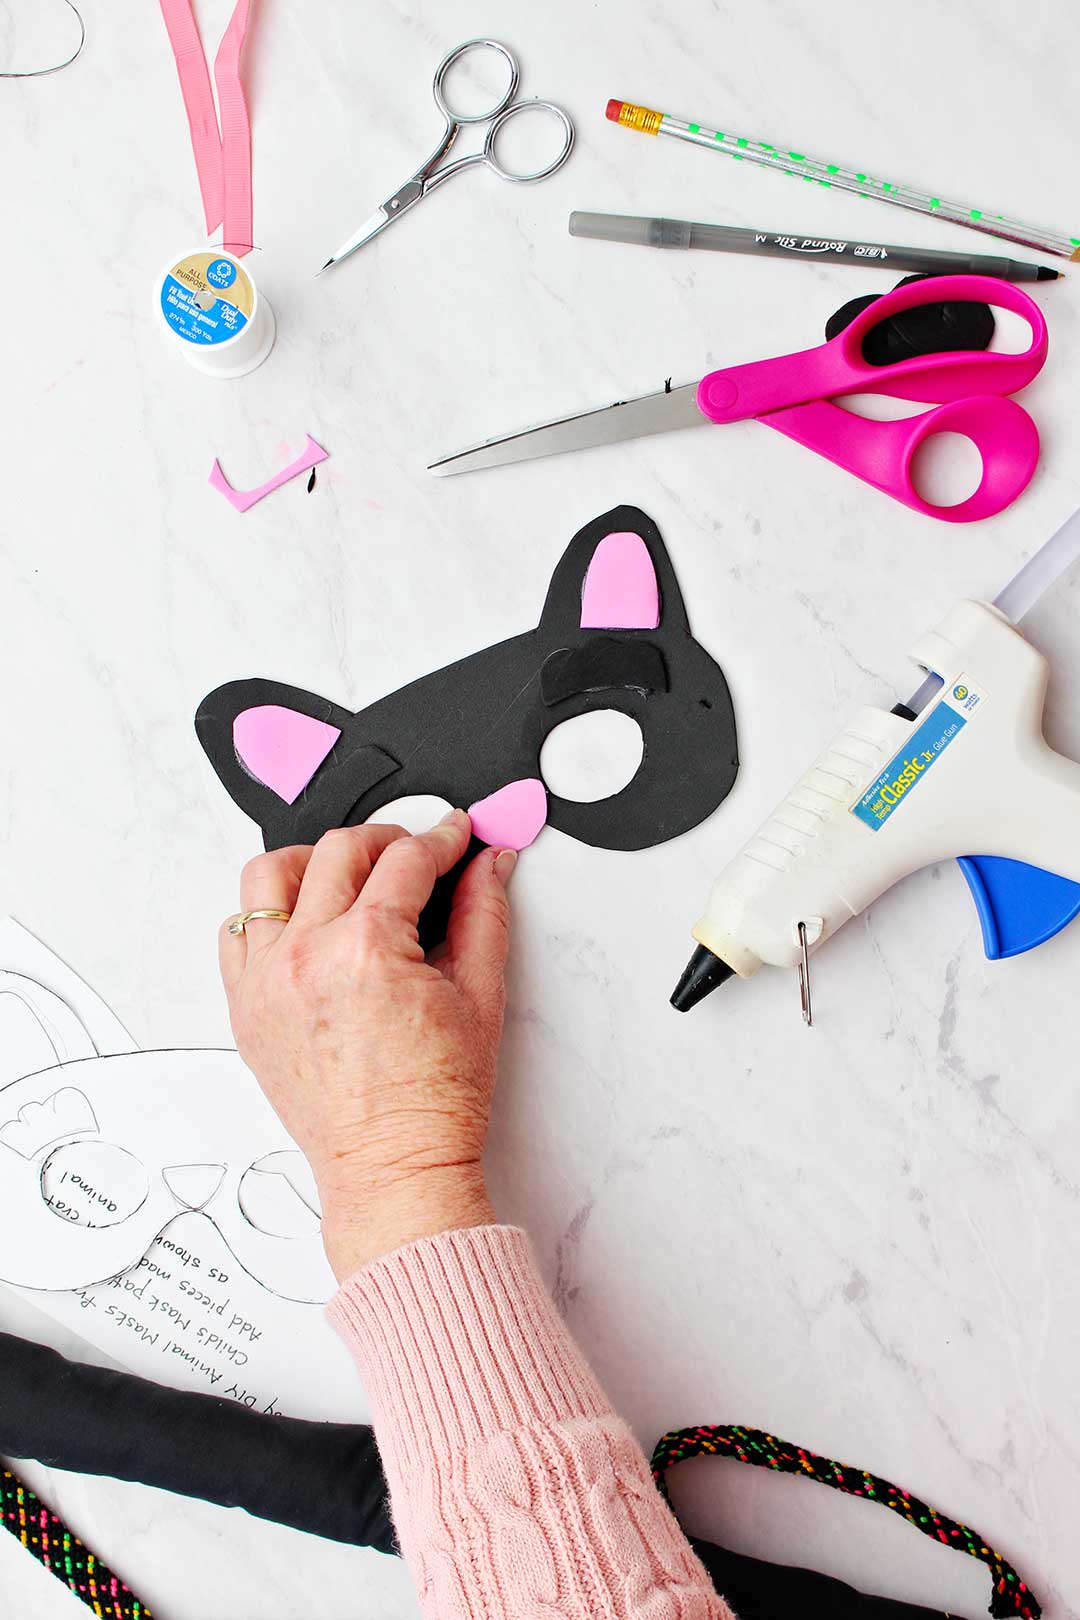 Hand hot gluing pink foam nose to black cat mask with craft supplies all around.